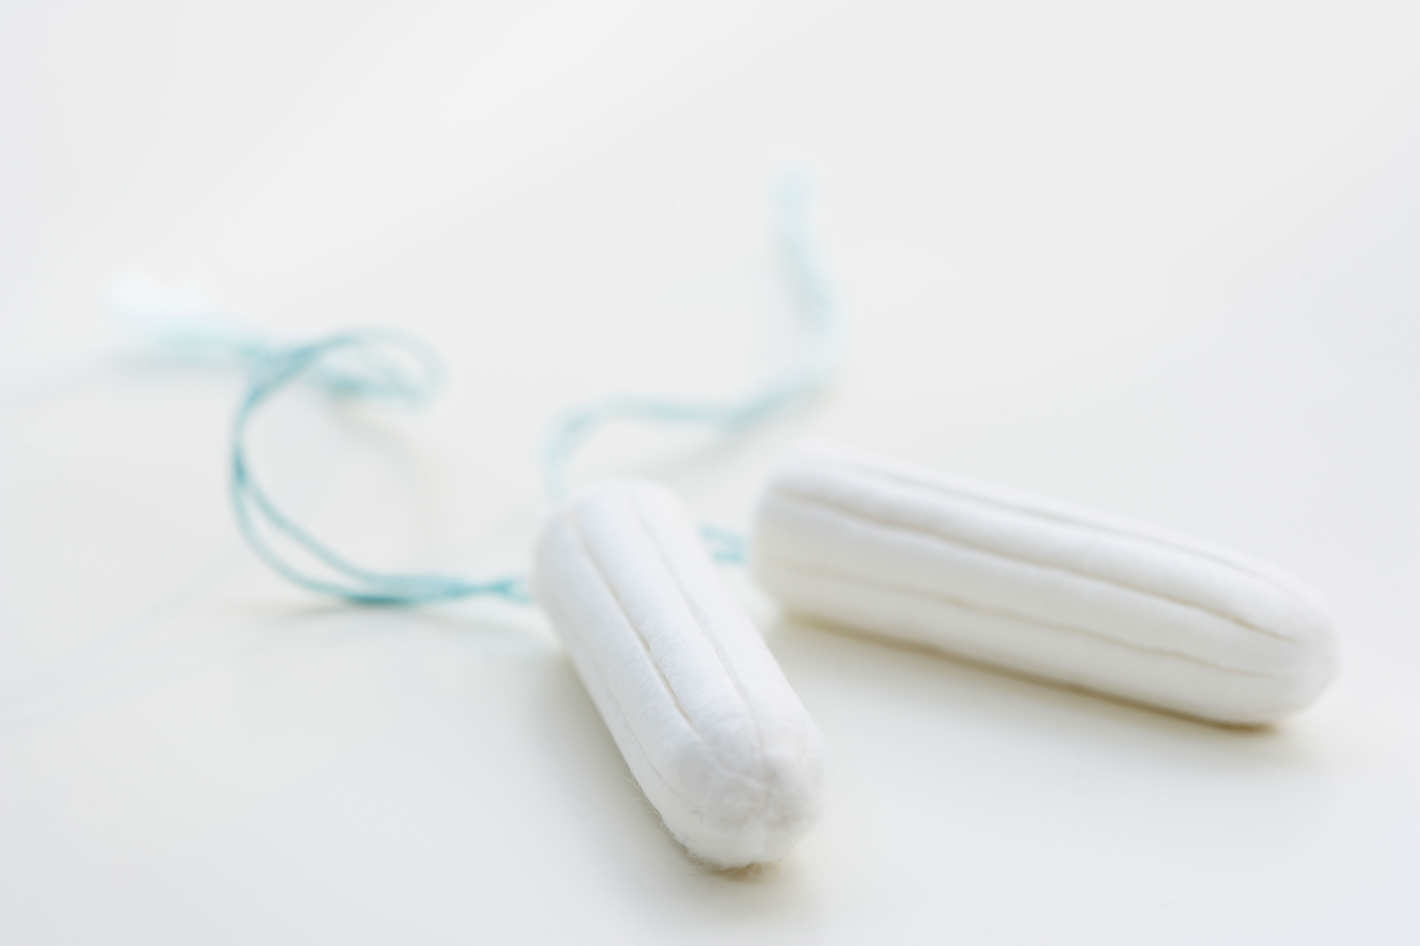 Historiker Tæl op Forkæle I Accidentally Had Two Tampons In. What Should I Do? | HuffPost Life